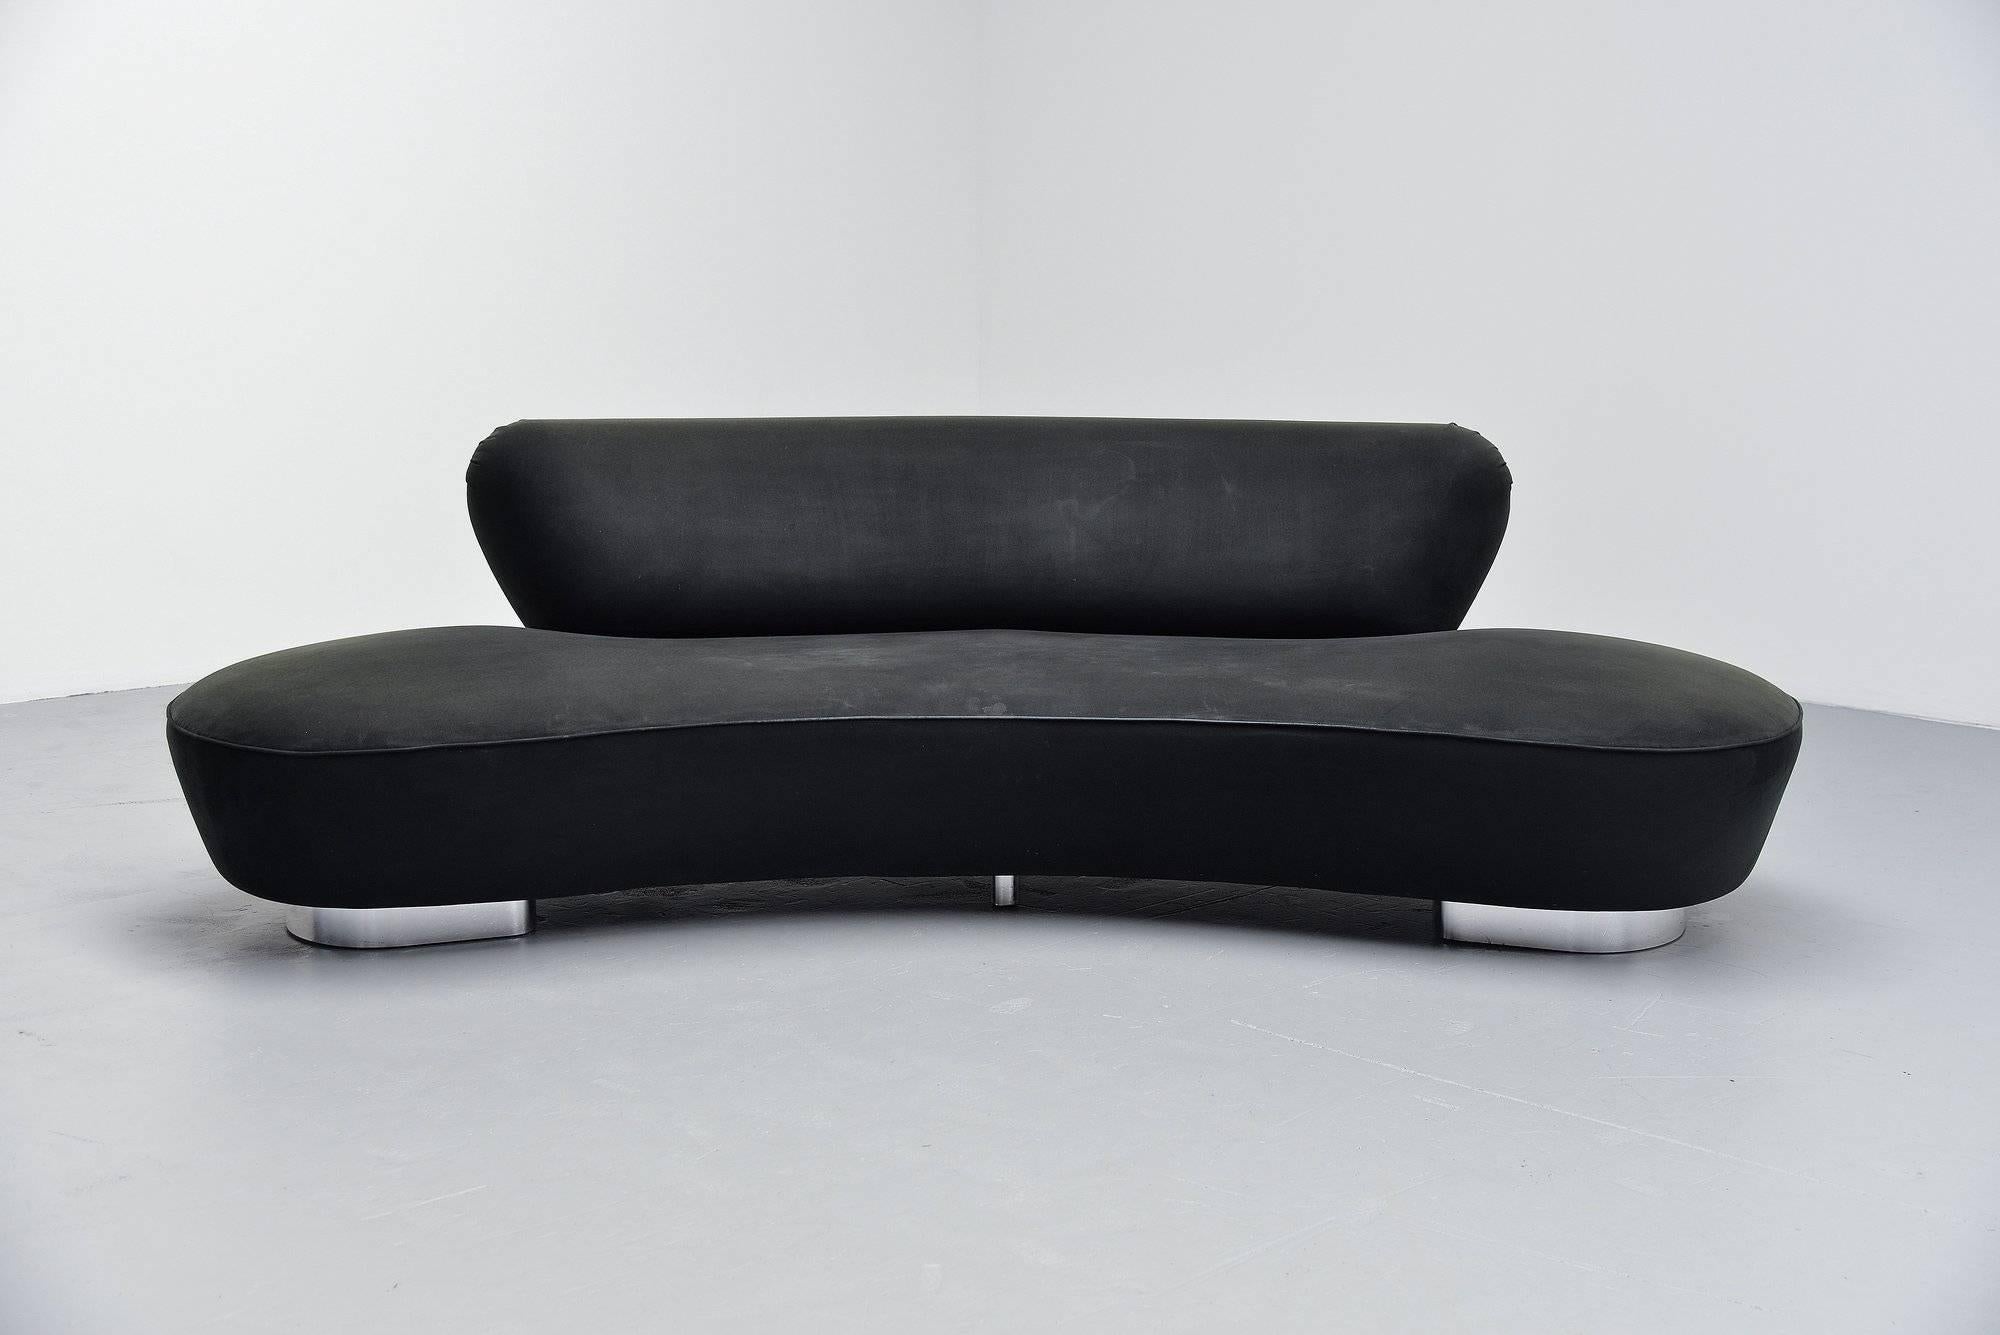 Very nice sculptural lounge sofa designed by Vladimir Kagan and manufactured by Directional, United States 1999. This sofa was upholstered upon request in black suede of high quality. The sofa is not marked but this was purchased ca 1999 and used in